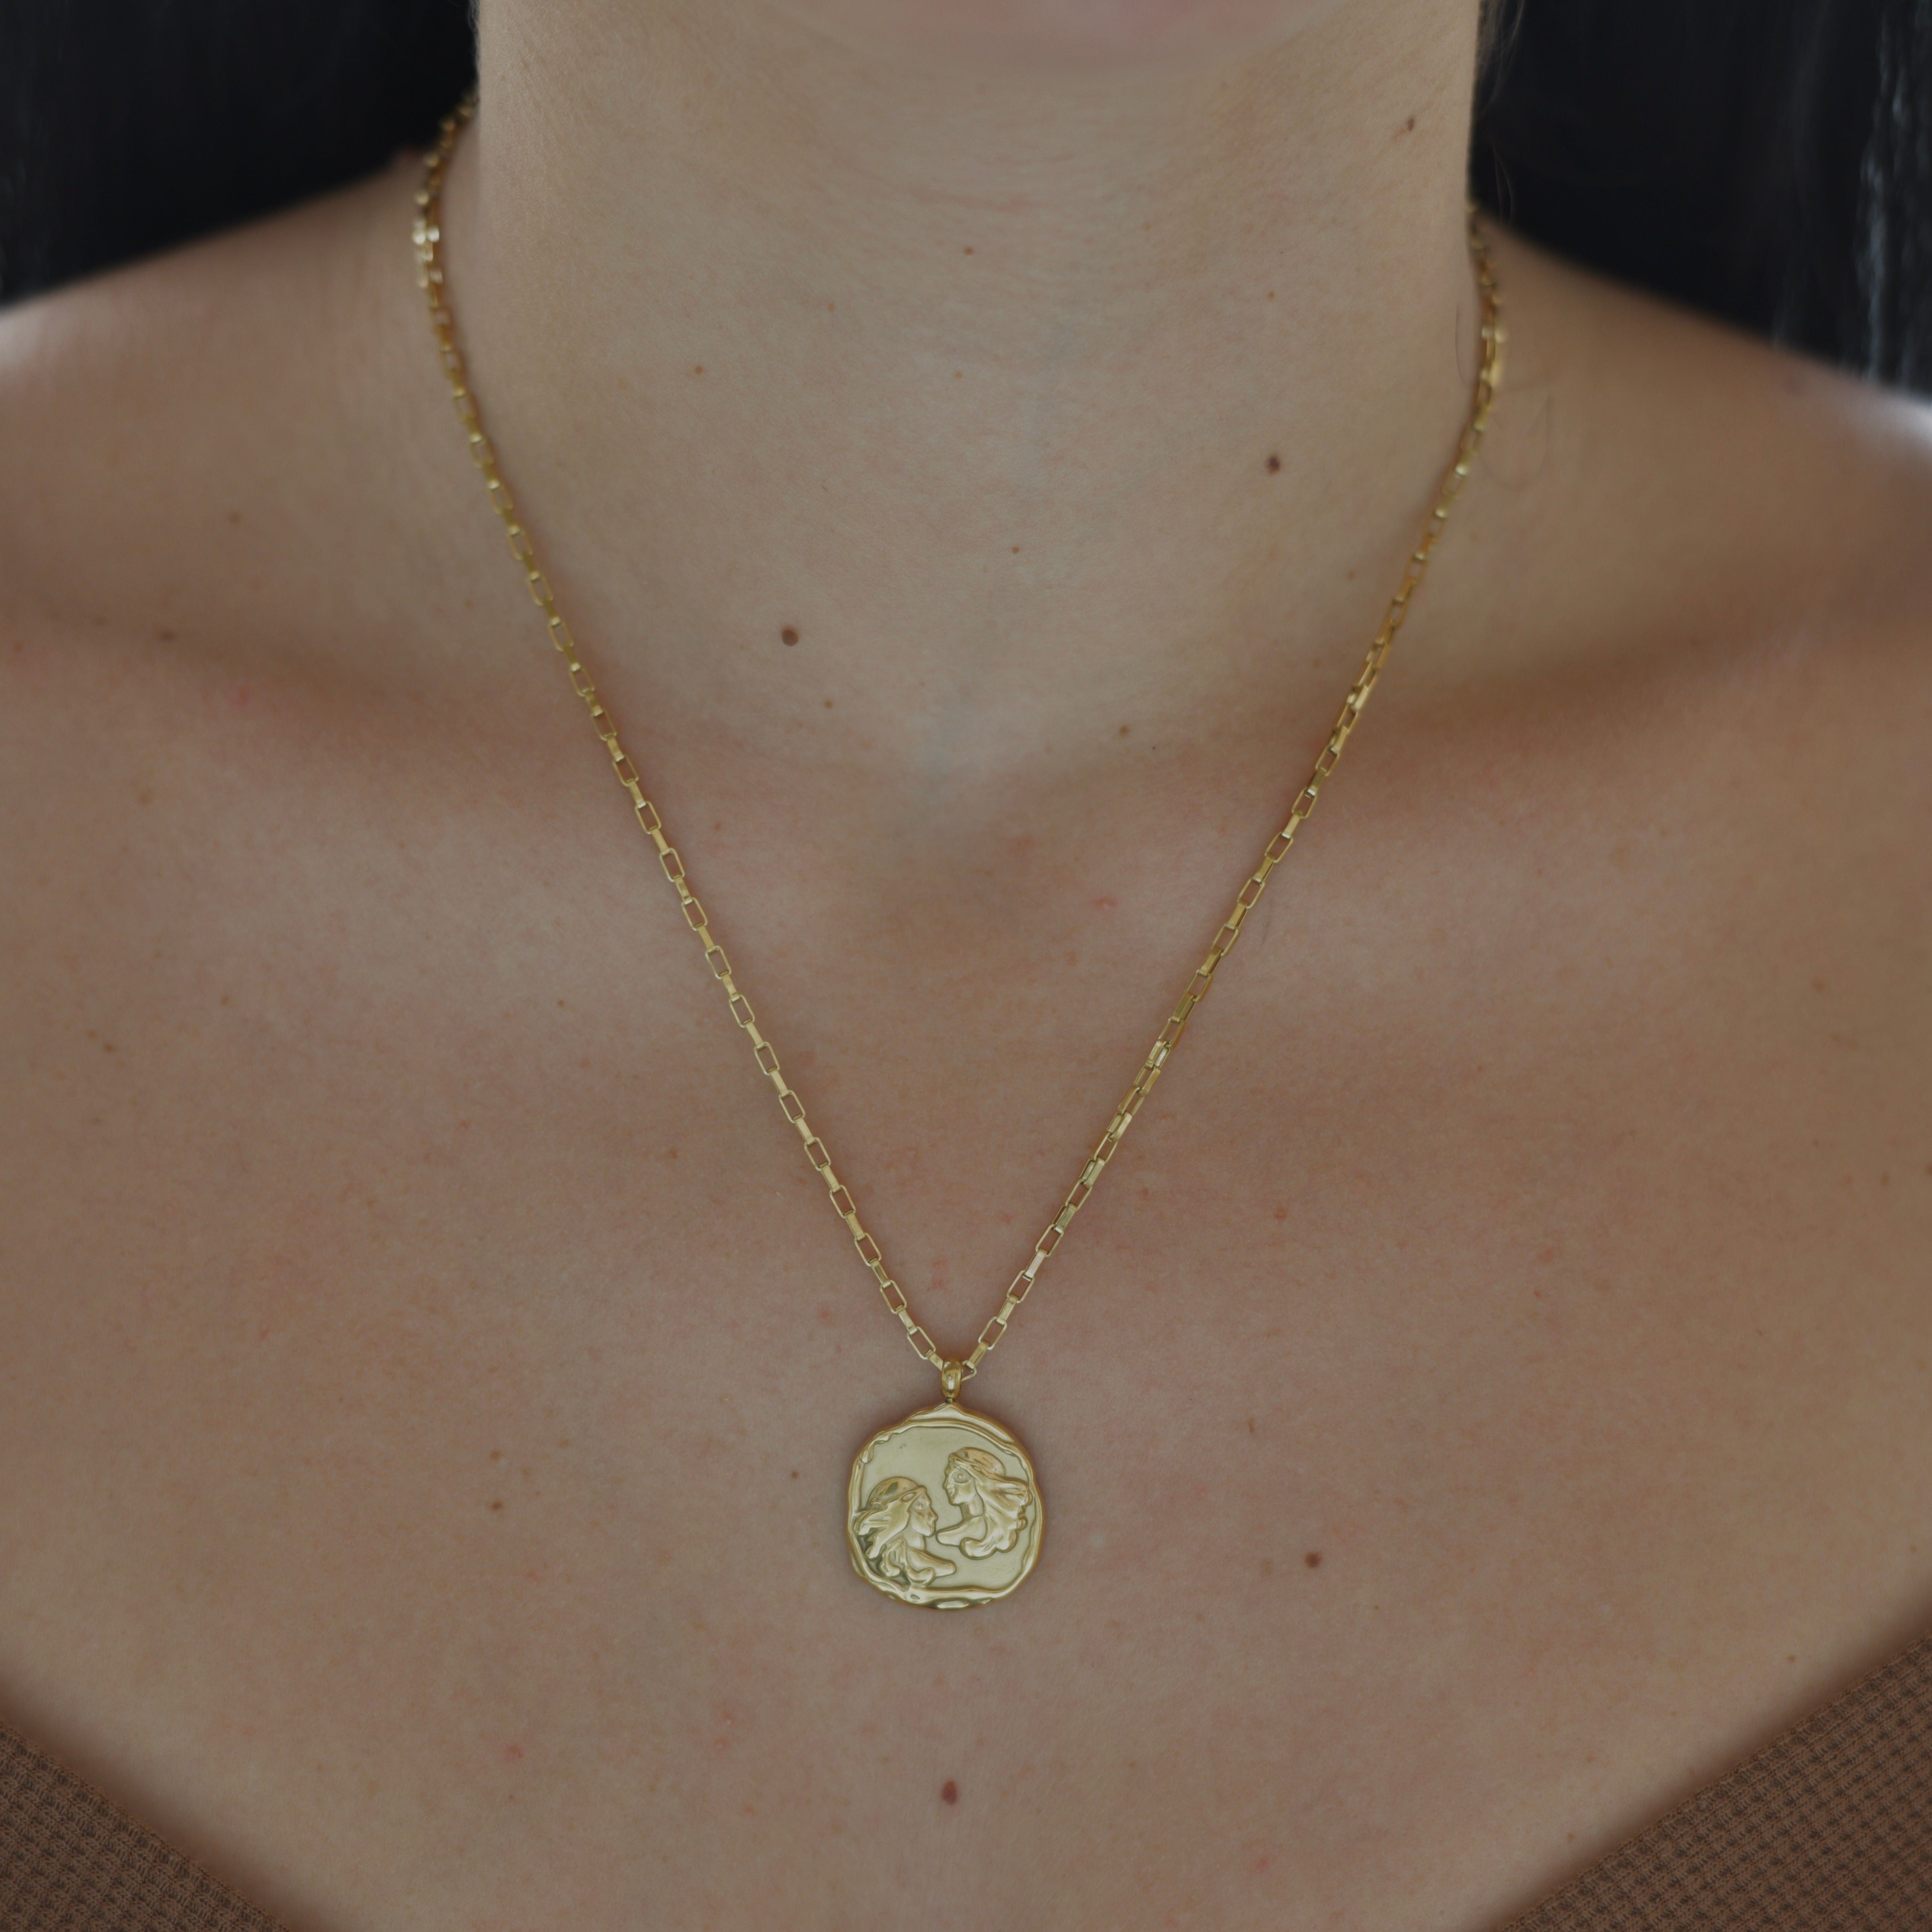 Gemini Zodiac Medallion Gold Necklace - Gold plated medallion irregular shape with two people rpresentin the twins - geminis on it. Gold chain necklace.